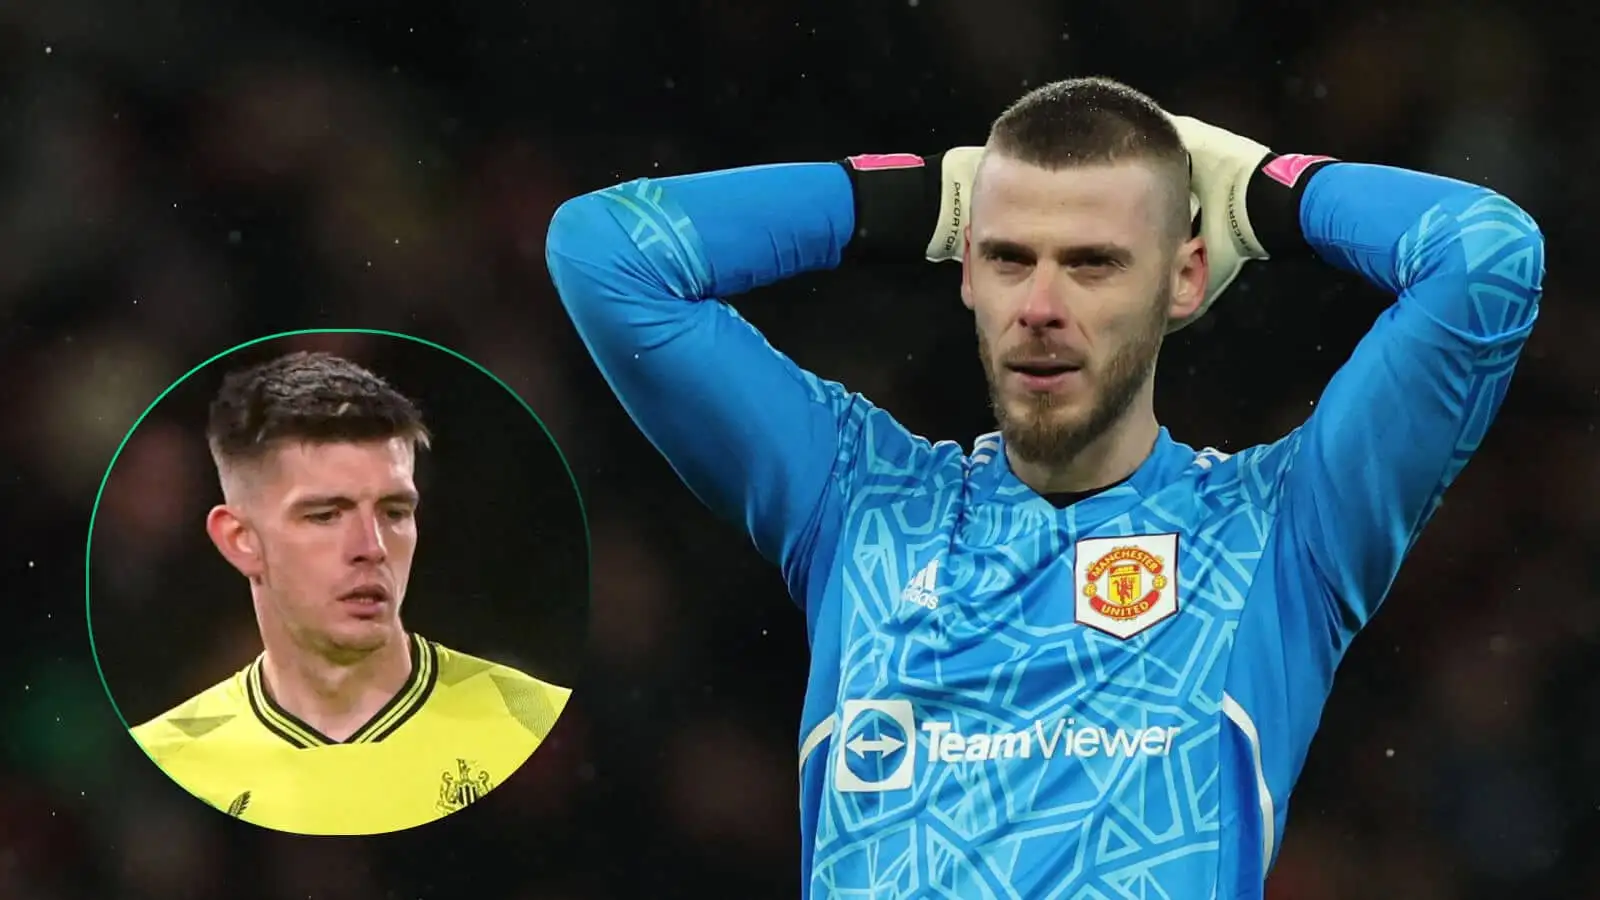 David de Gea playing for Man Utd, with Newcastle's Nick Pope pictured in a bubble next to him